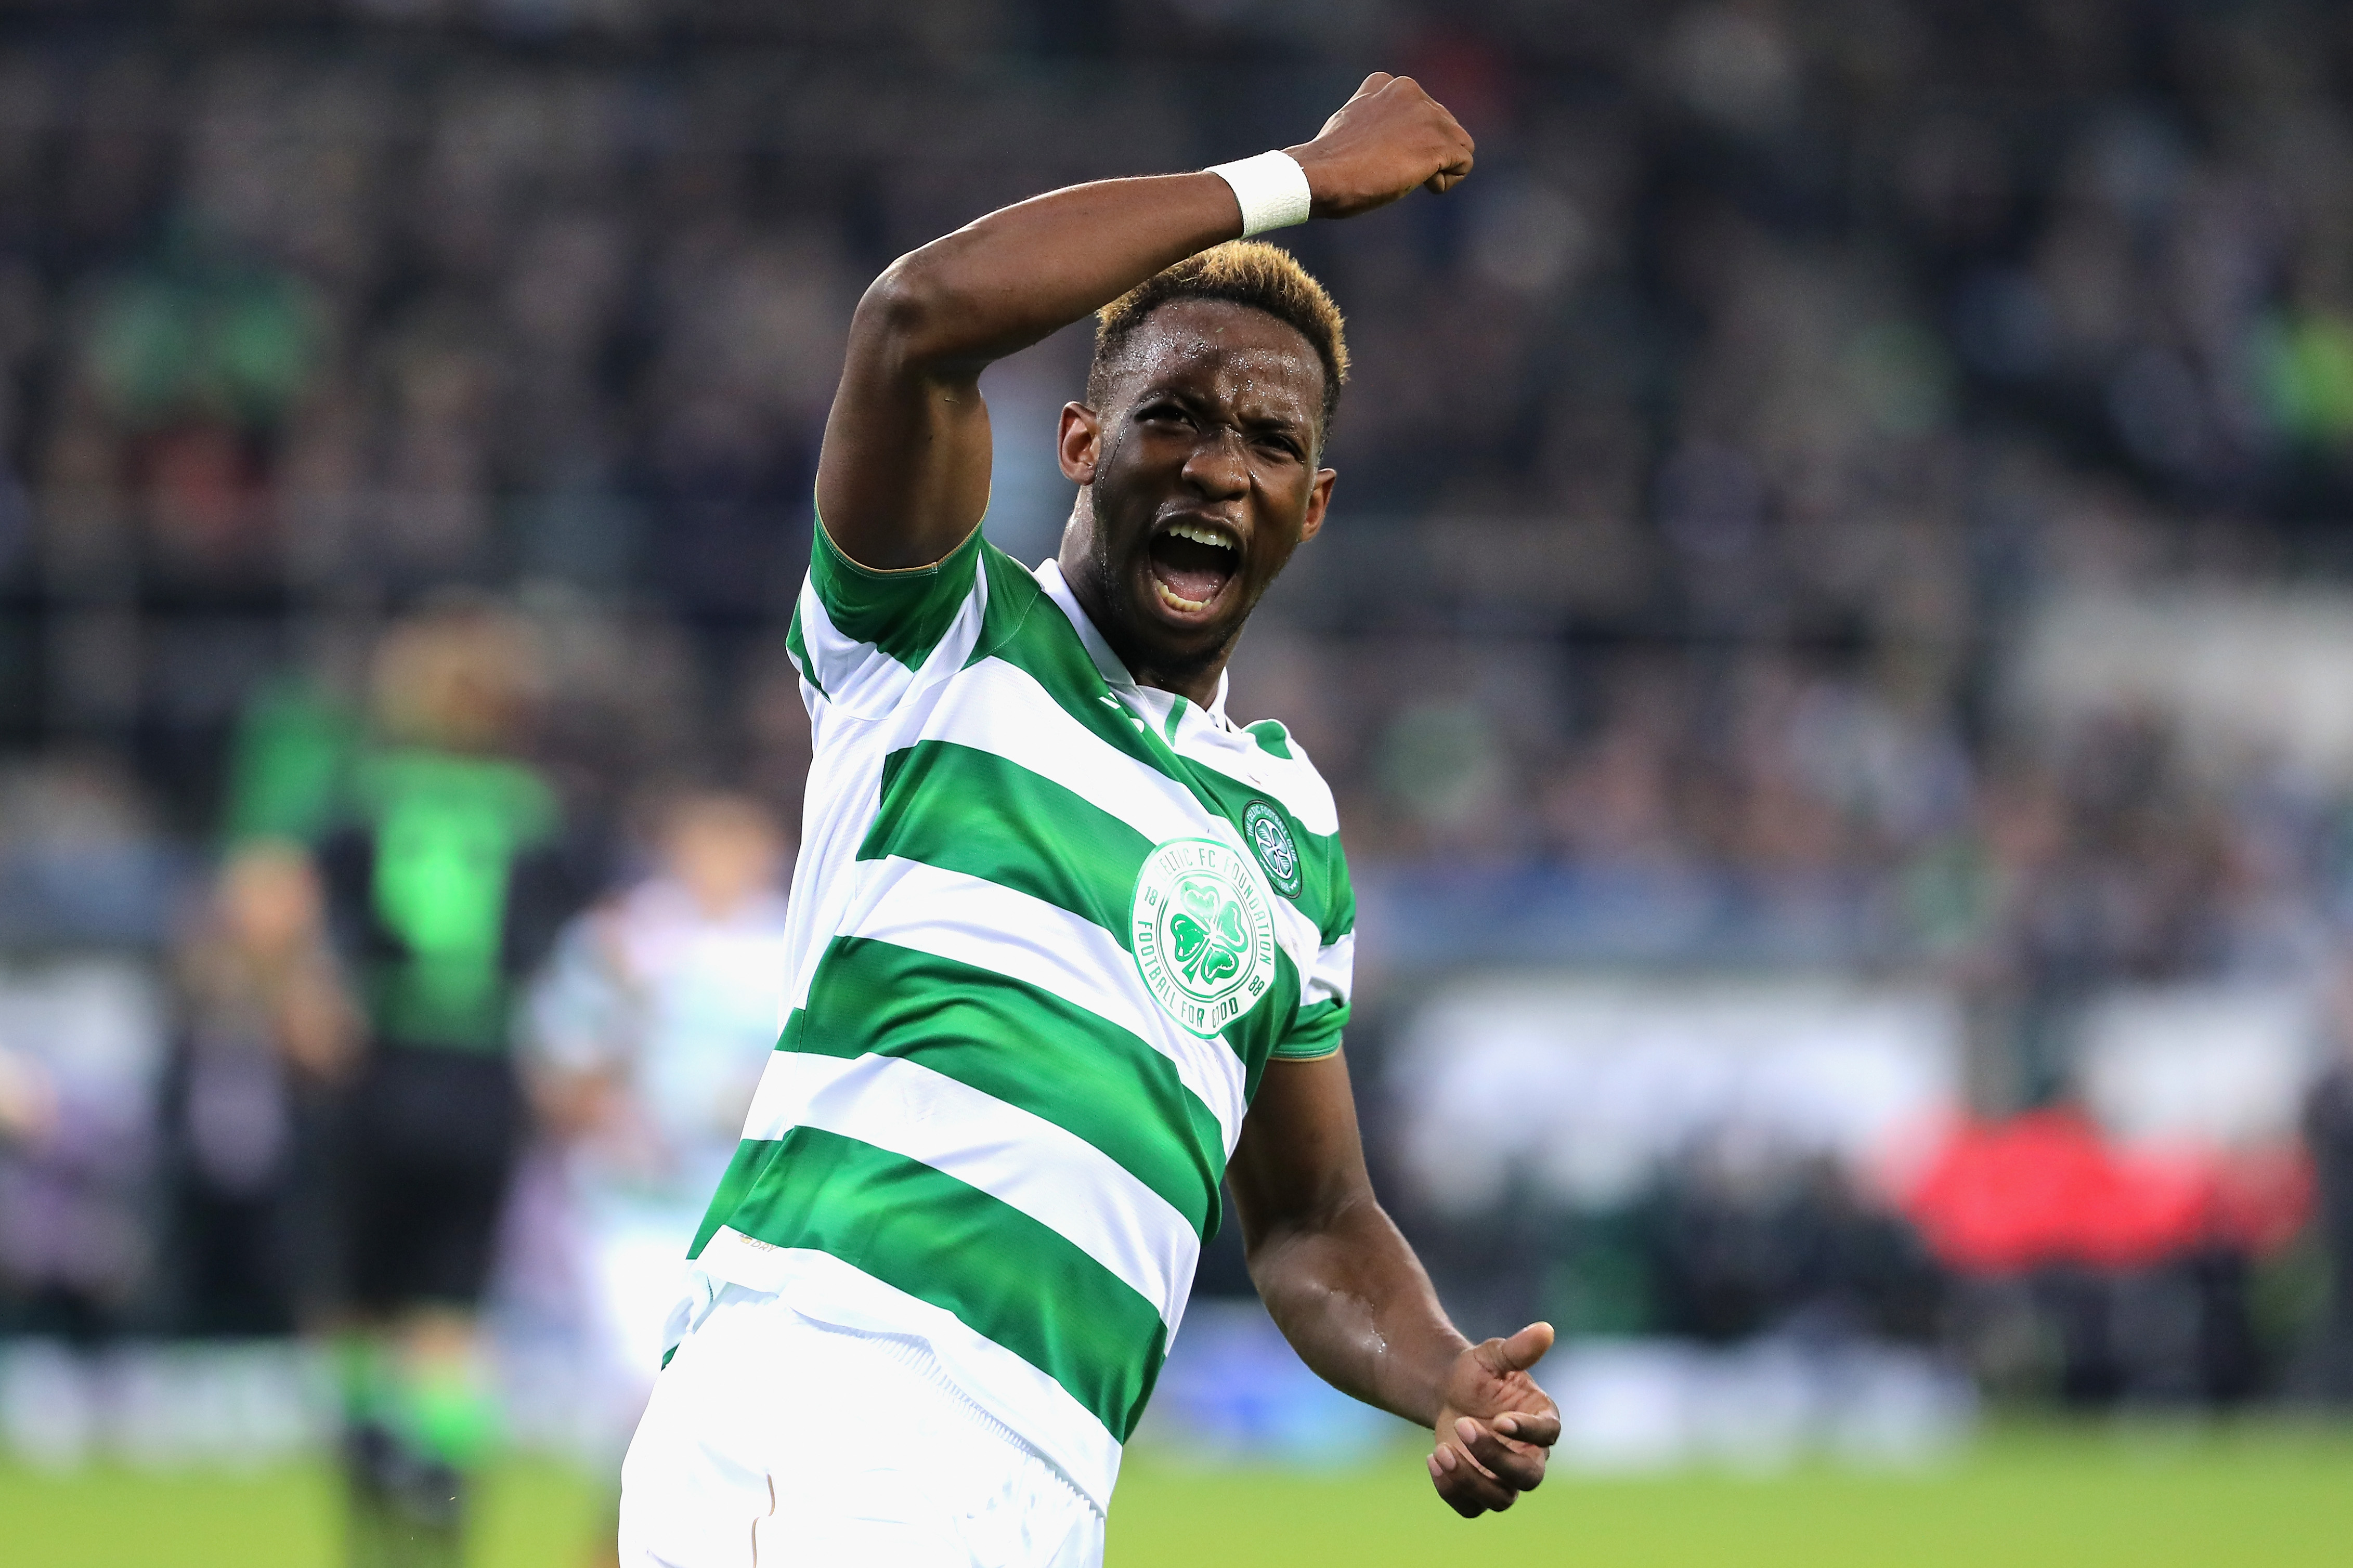 MOENCHENGLADBACH, GERMANY - NOVEMBER 01: Moussa Dembele of Celtic celebrates scoring his sides first goal during the UEFA Champions League Group C match between VfL Borussia Moenchengladbach and Celtic at Borussia-Park on November 1, 2016 in Moenchengladbach, Germany.  (Photo by Simon Hofmann/Bongarts/Getty Images)